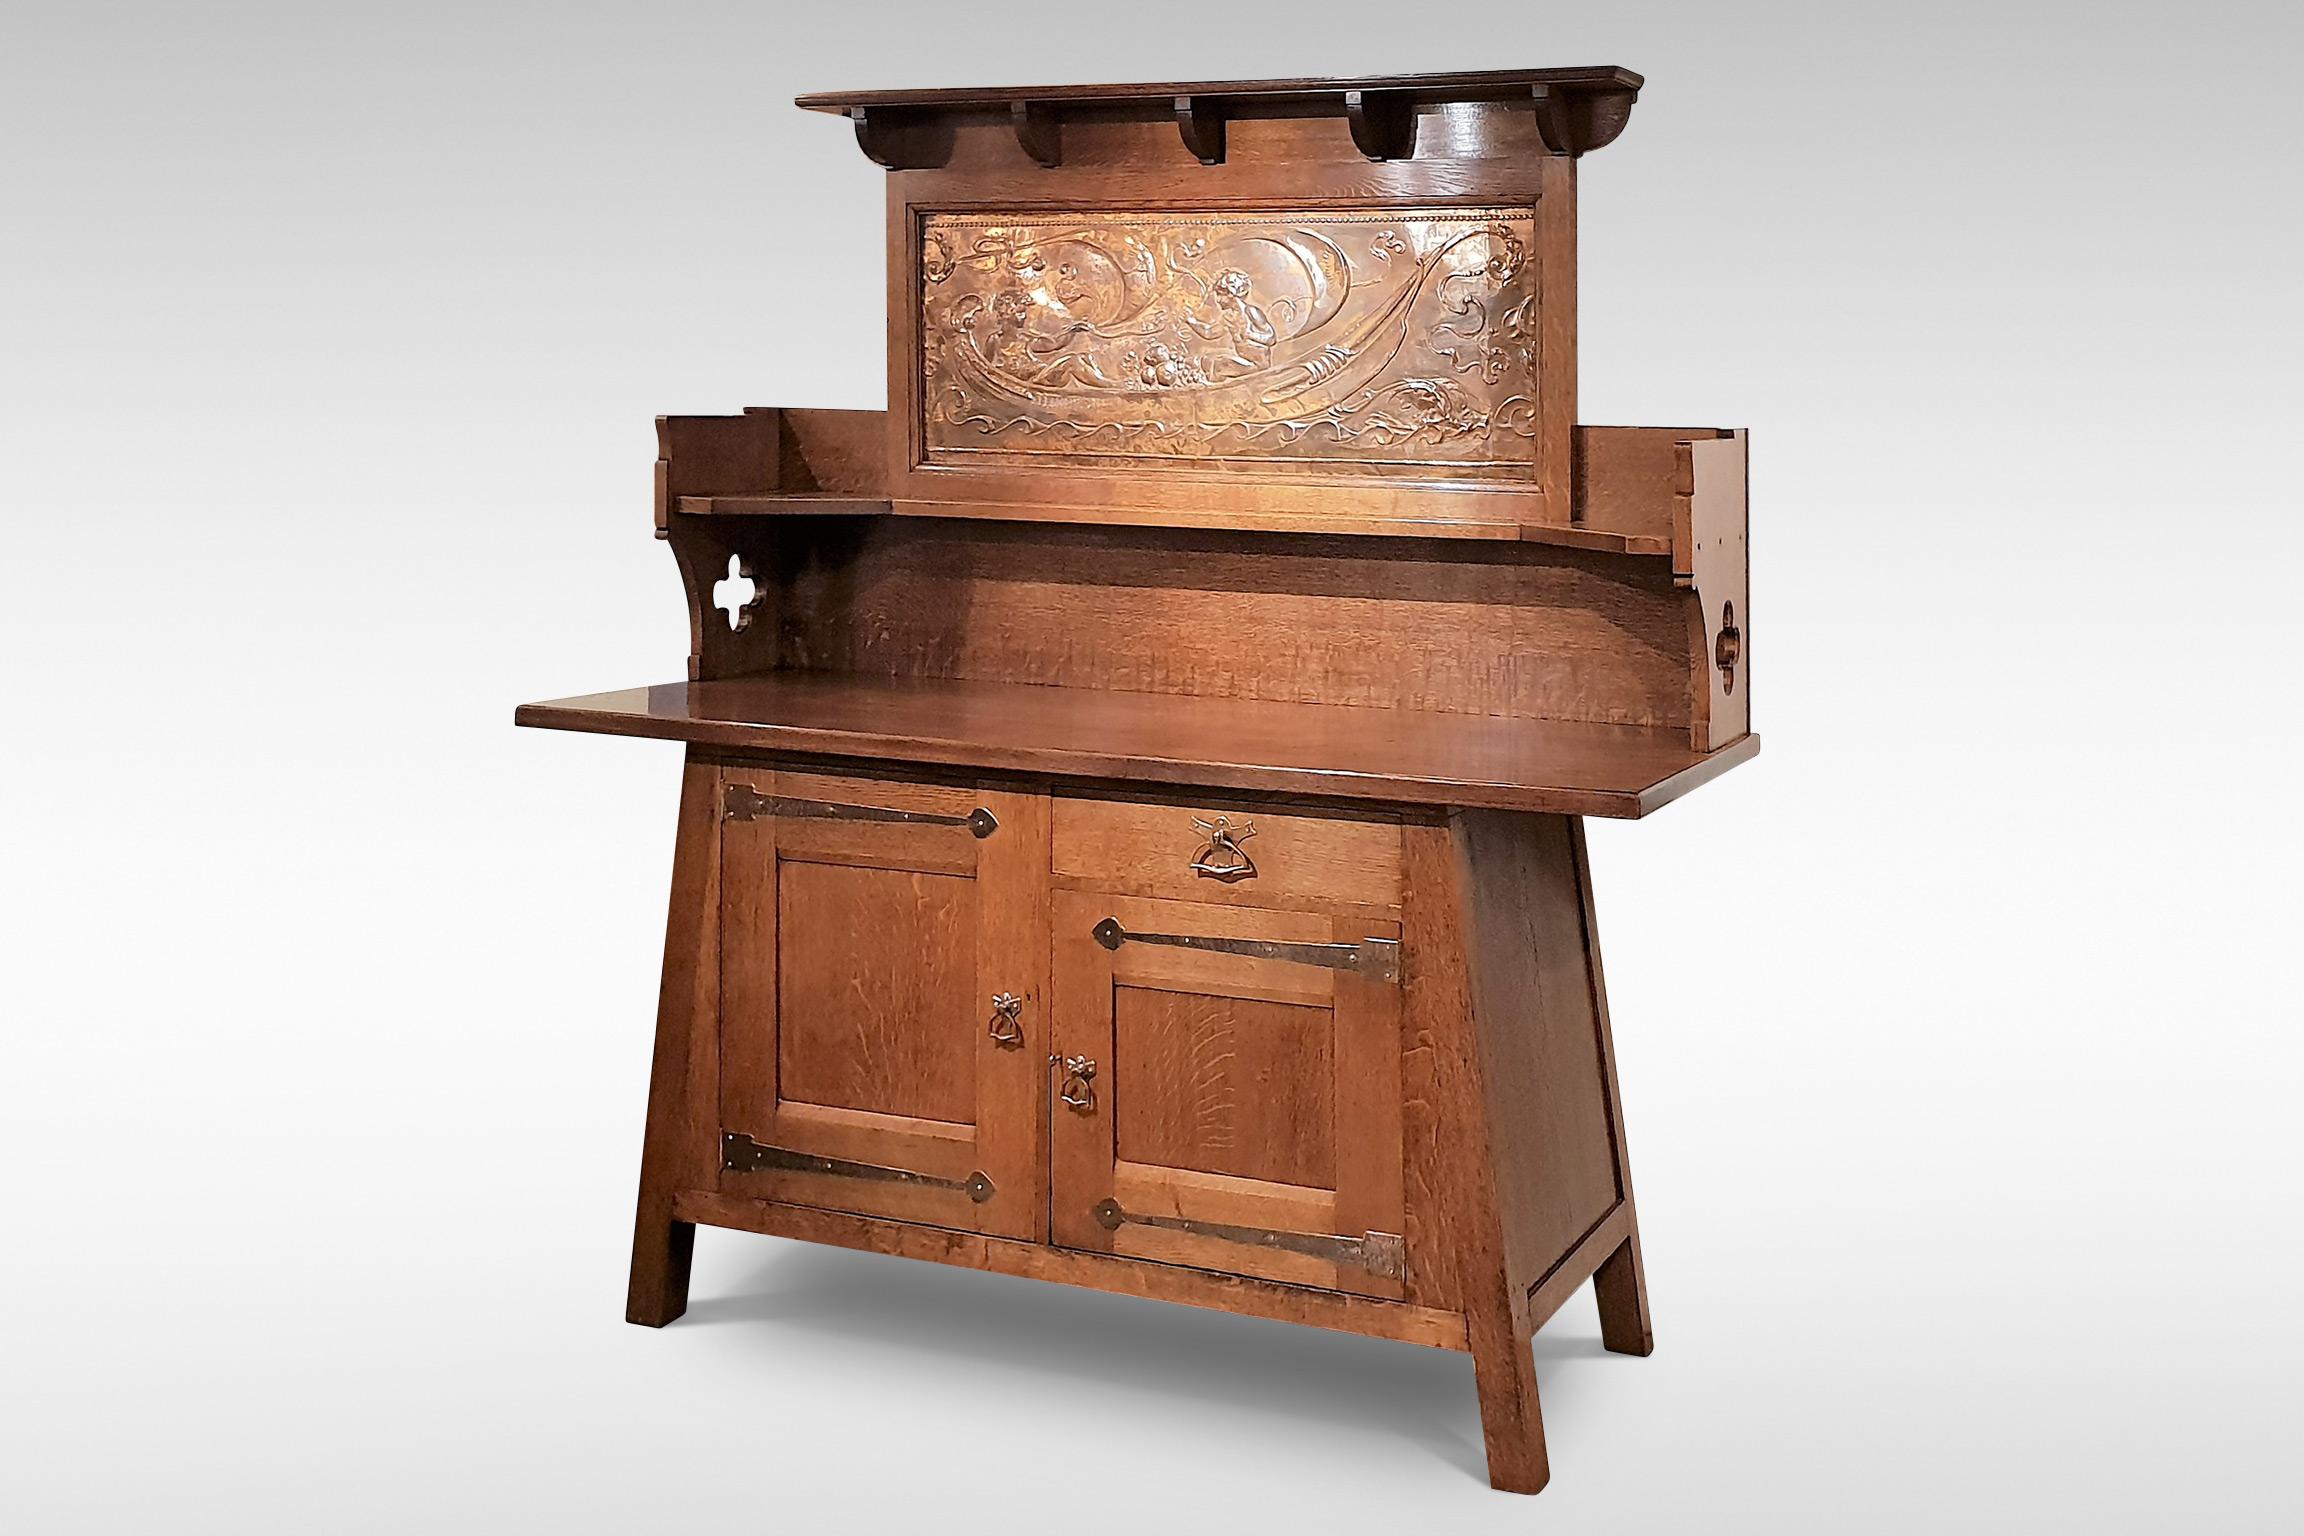 A superb example of Arts & Crafts design, possibly by Leonard Wyburd. It is in oak with a large copperised metal plaque, copper handles and hand-beaten hinges,
circa 1895-1900

The Witlaf sideboard first appears in the Liberty & Co 'Handbook of